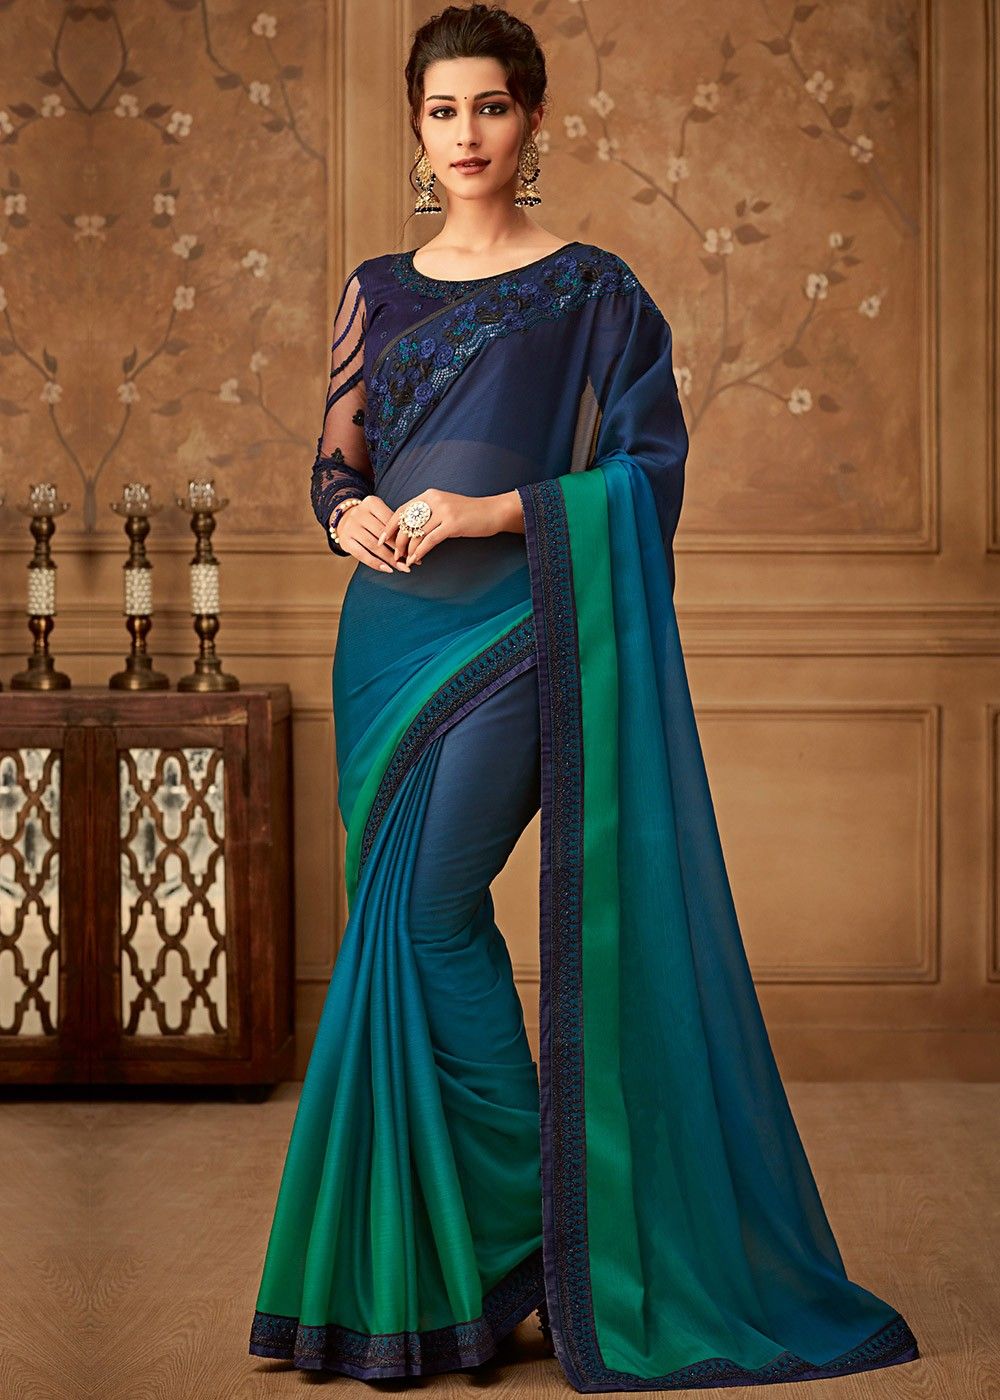 Plain Saris With Different Borders